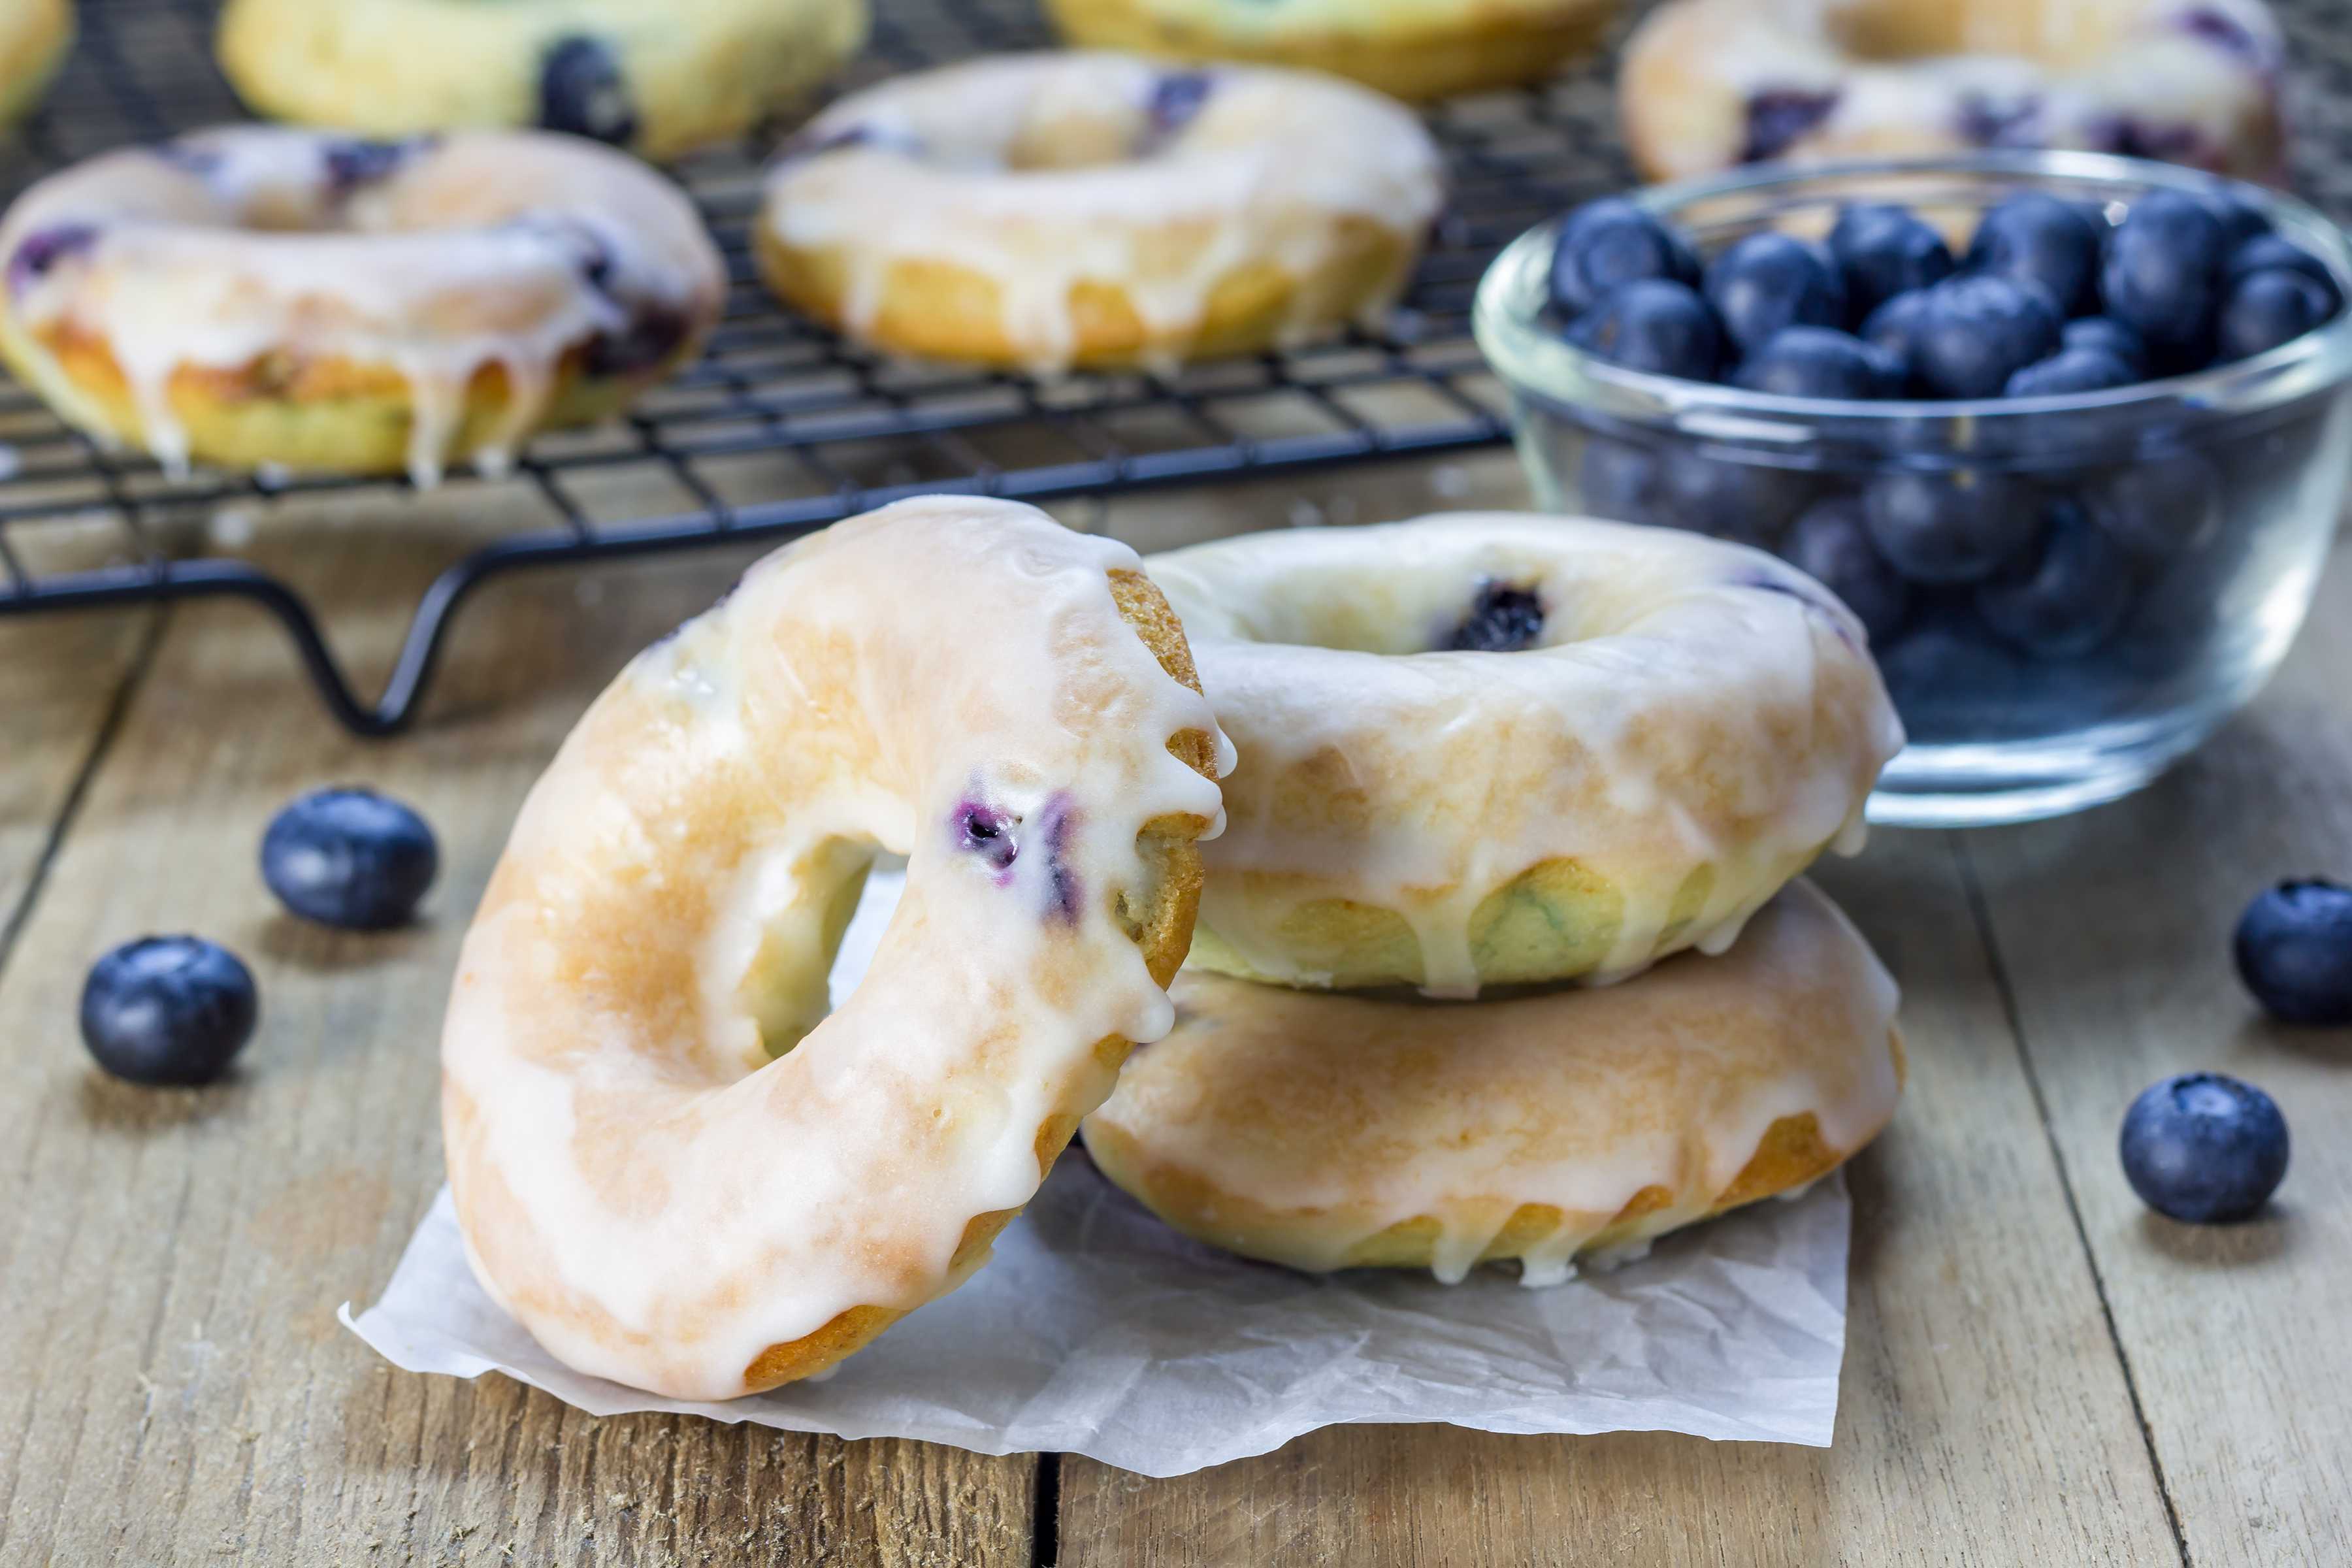 Stack of three baked blueberry donuts with glaze, with more donuts on cooling rack in the background.